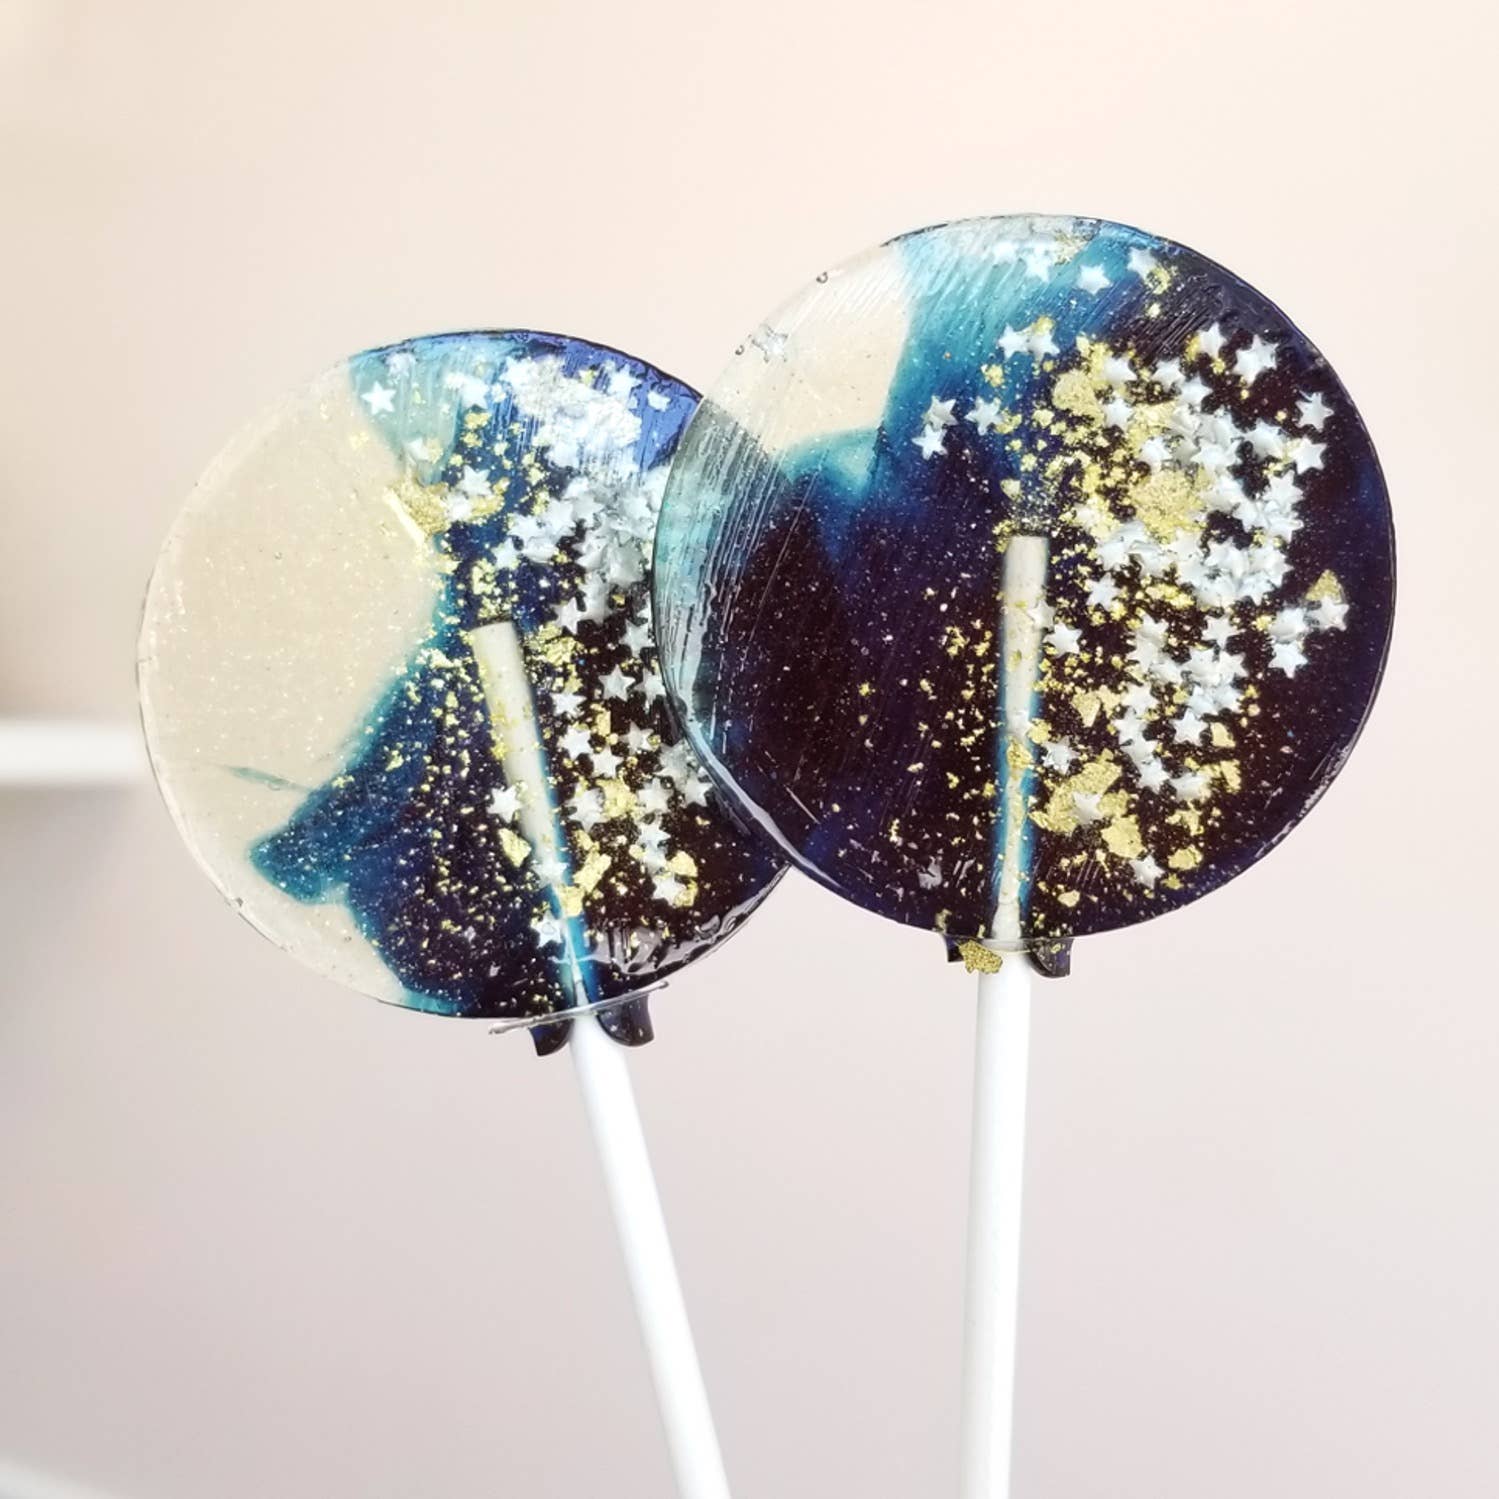 Sweet Caroline Confections - Navy Star Galaxy Lollipops, Blueberry